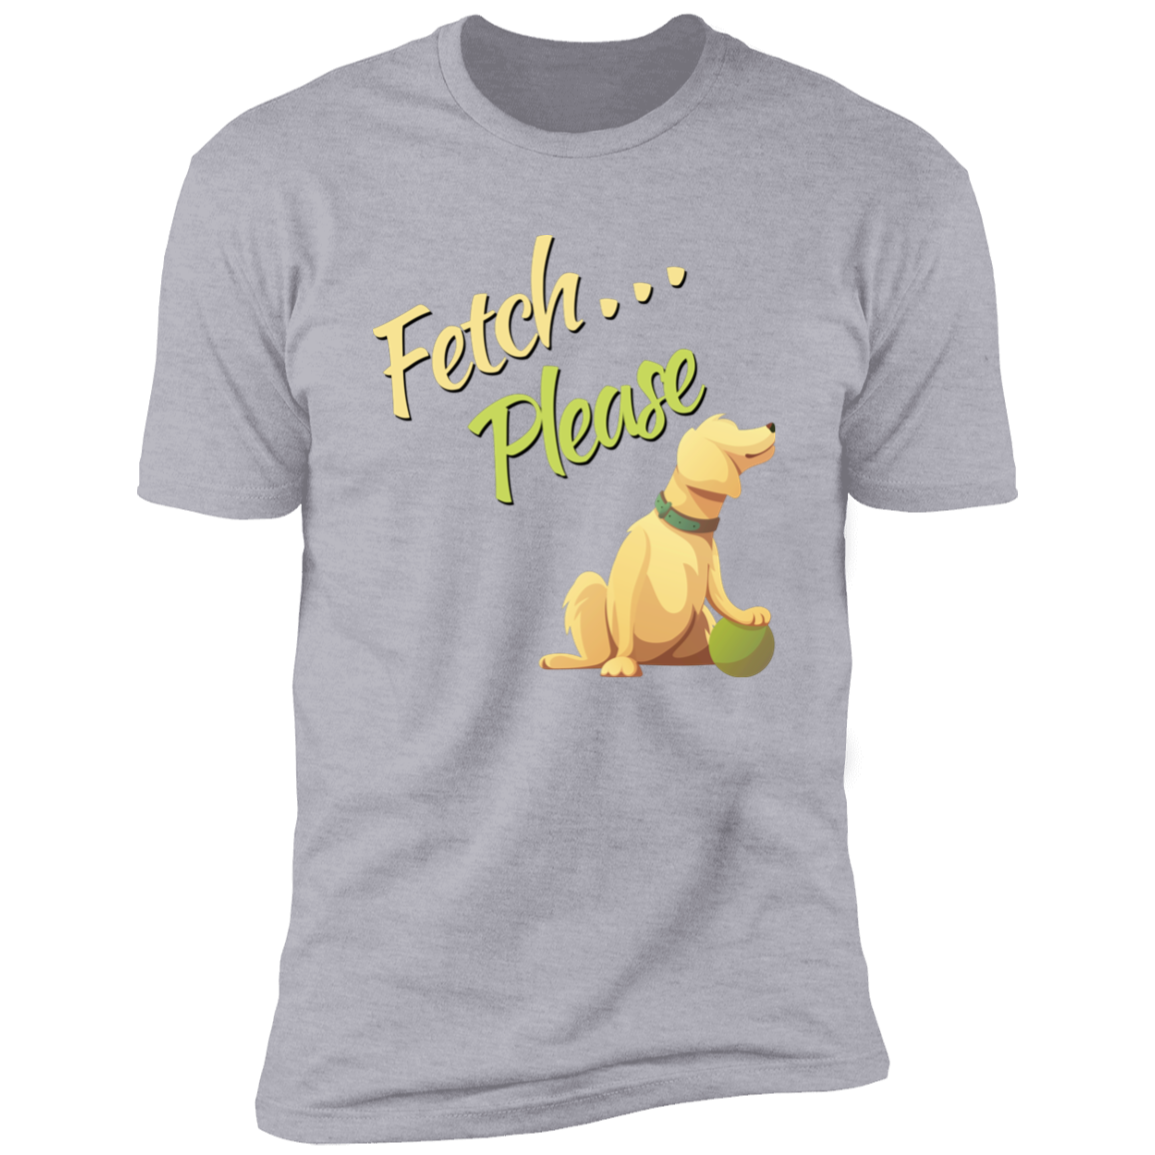 Fetch Please funny dog t-shirt, funny dog shirt for humans, in light heather gray